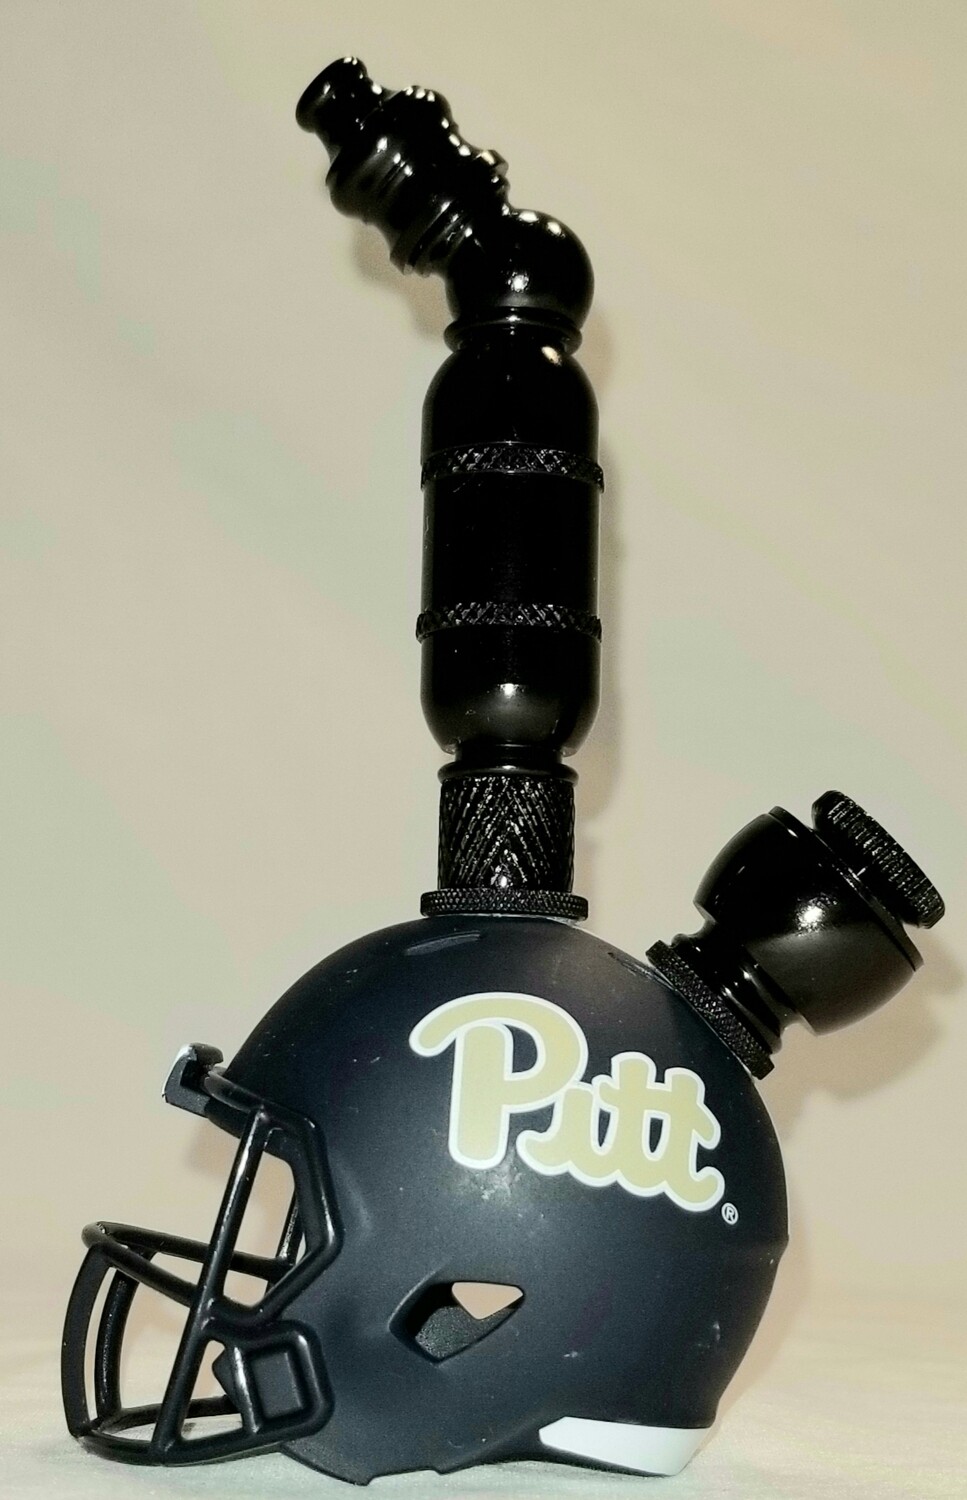 PIT PANTHERS "BAD ASS" FOOTBALL HELMET SMOKING PIPE Upright/Black Anodized/Navy